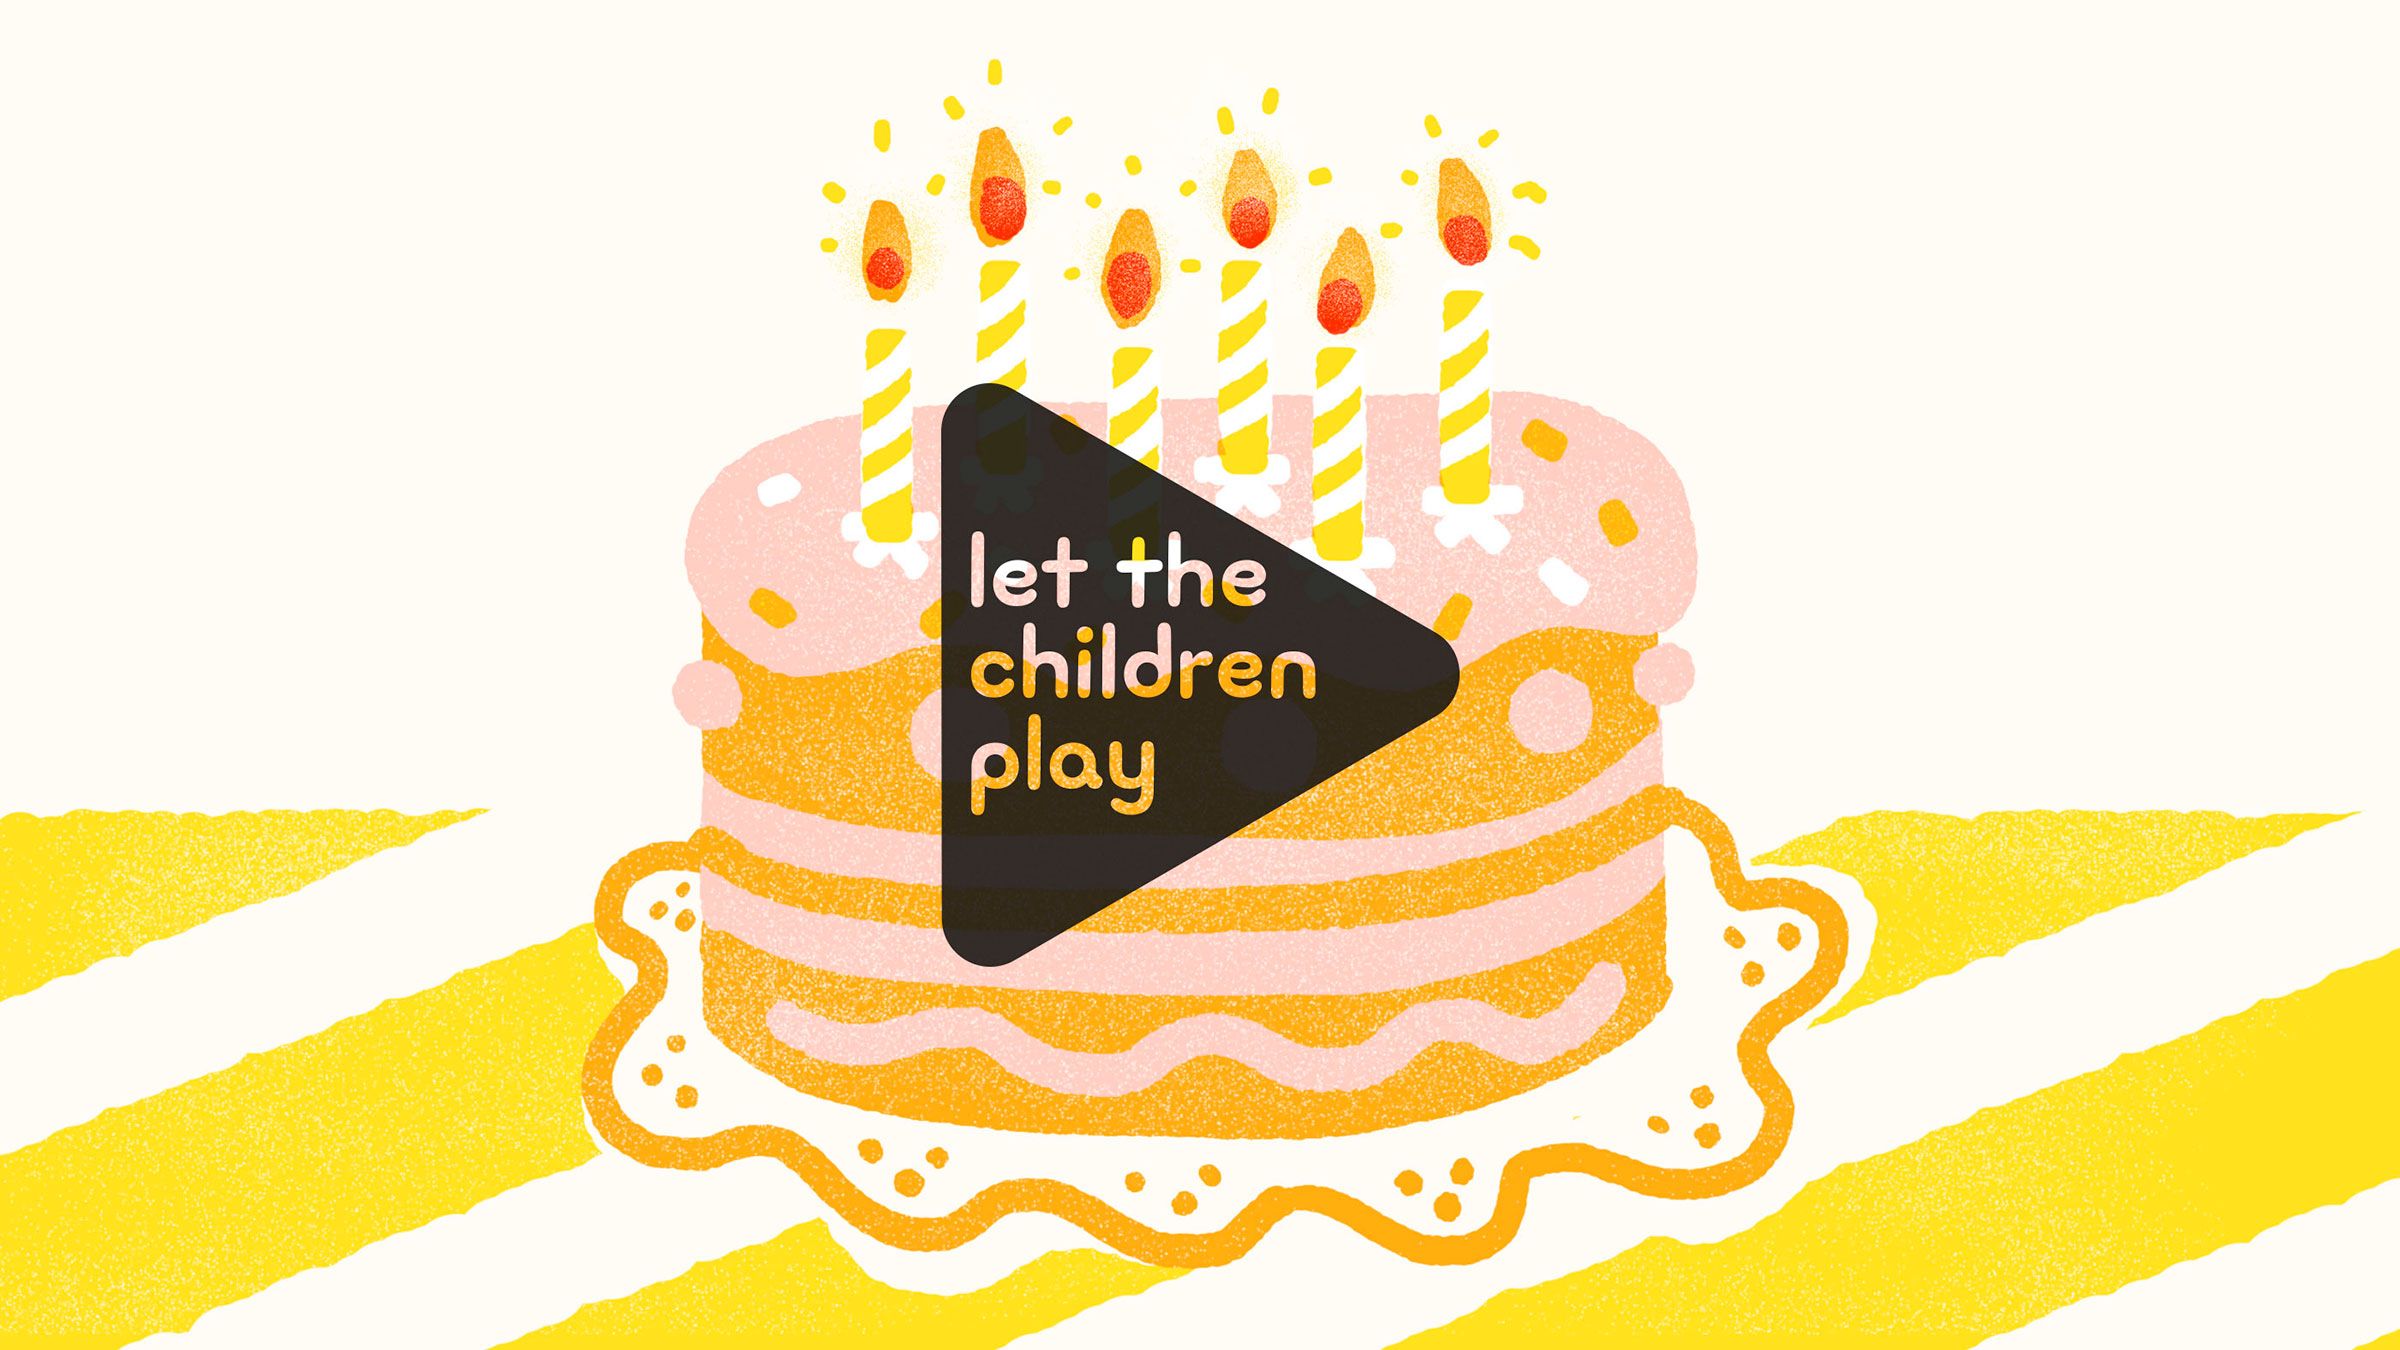 RPS - Let the children play - Happy Birthday